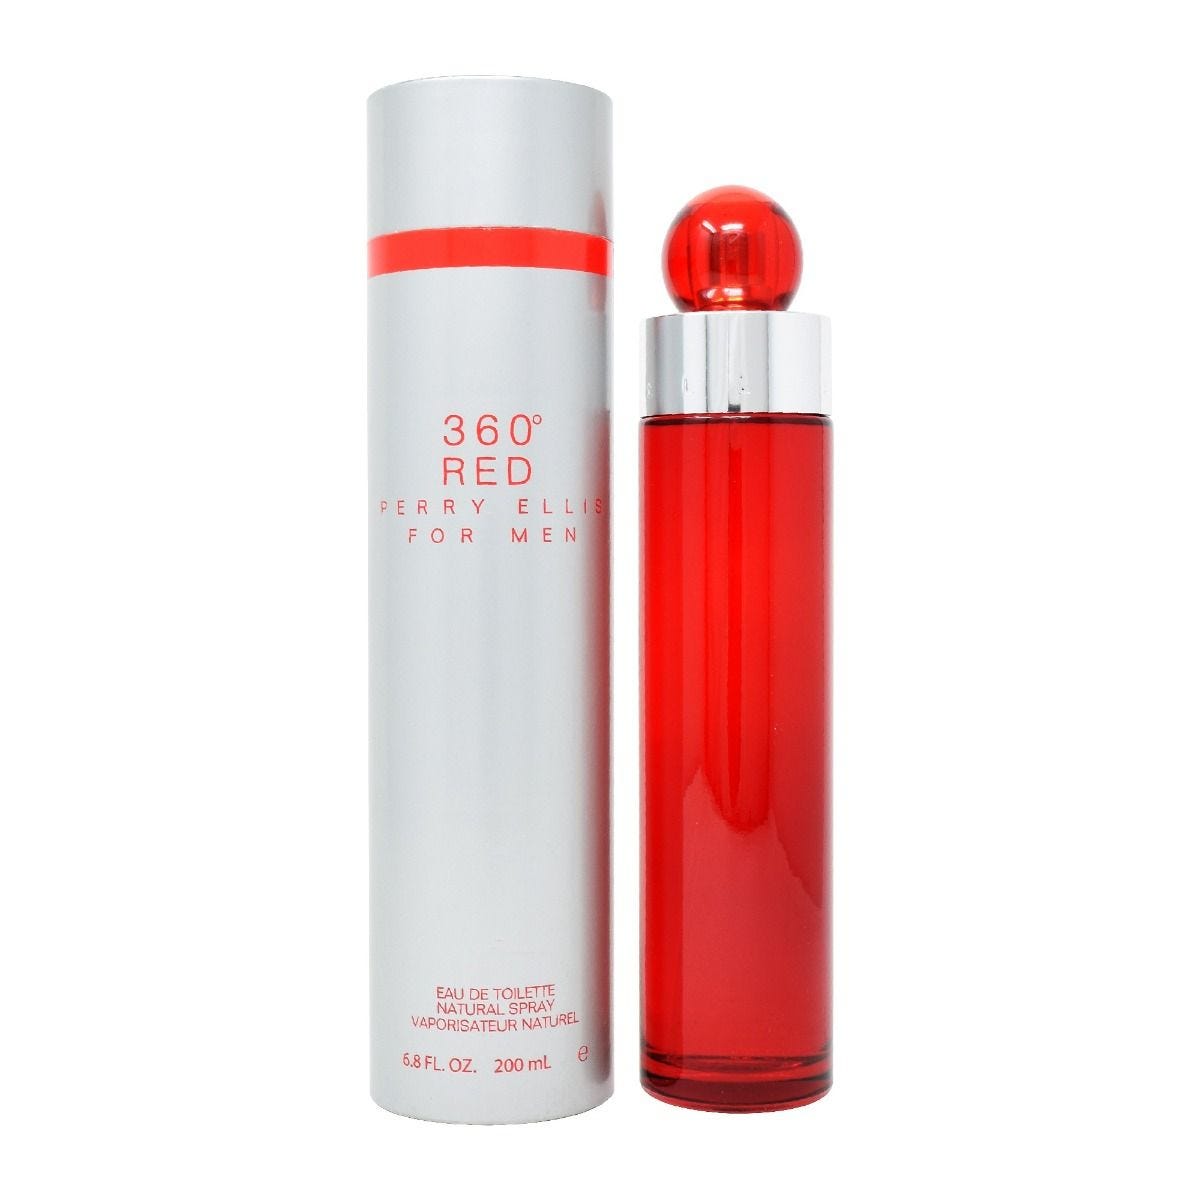 PERRY ELLIS  -  360° RED FOR MEN